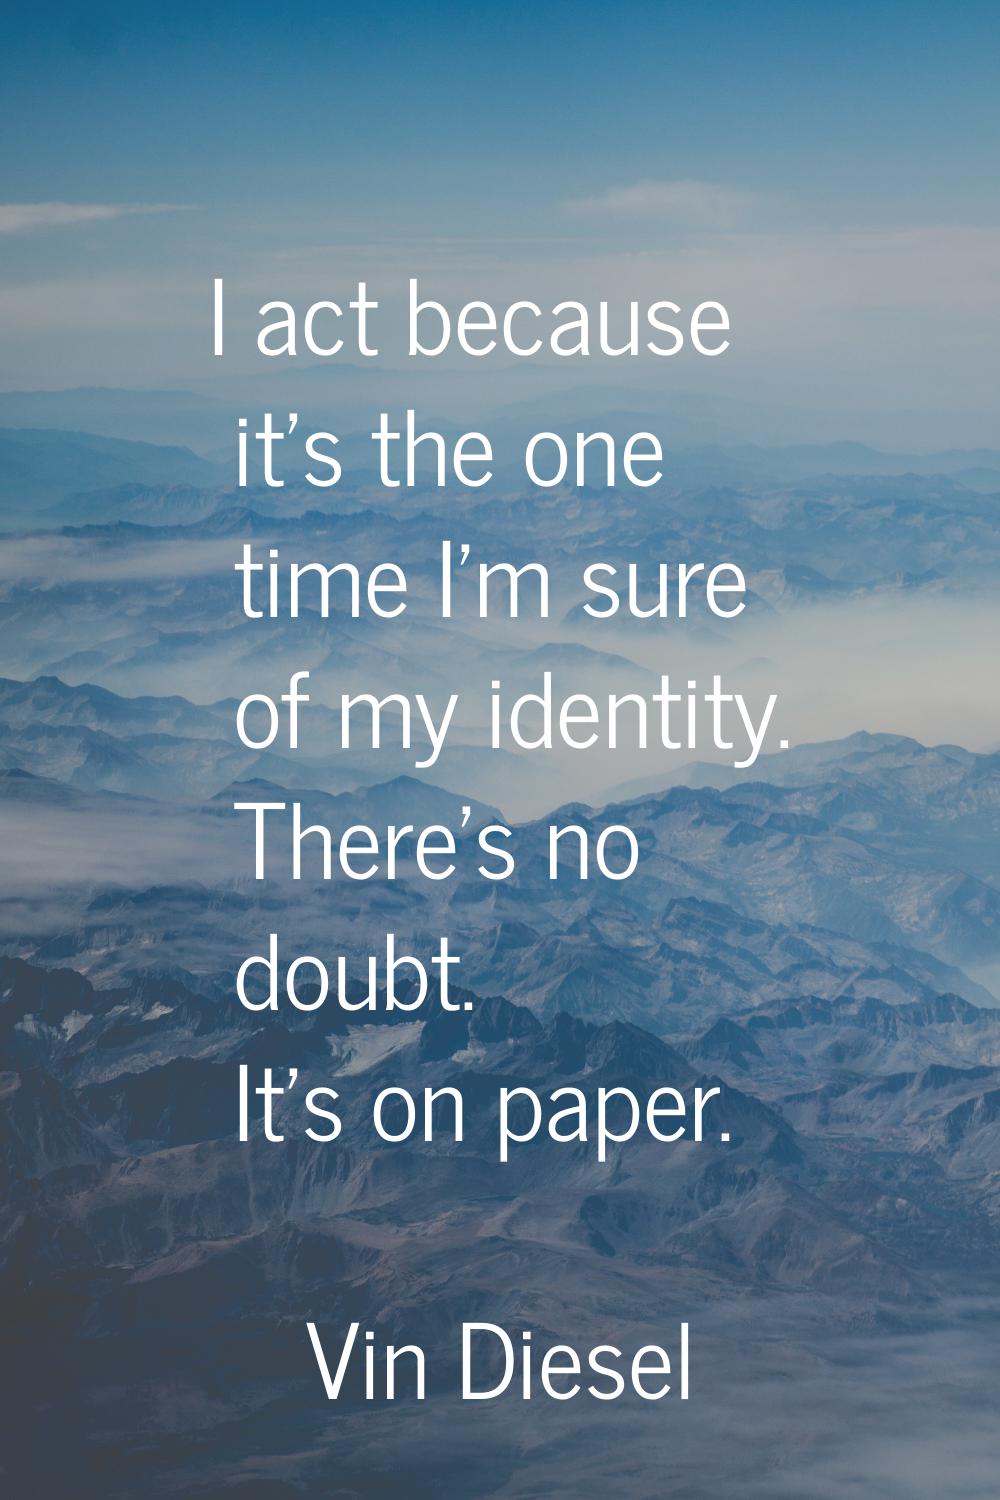 I act because it's the one time I'm sure of my identity. There's no doubt. It's on paper.